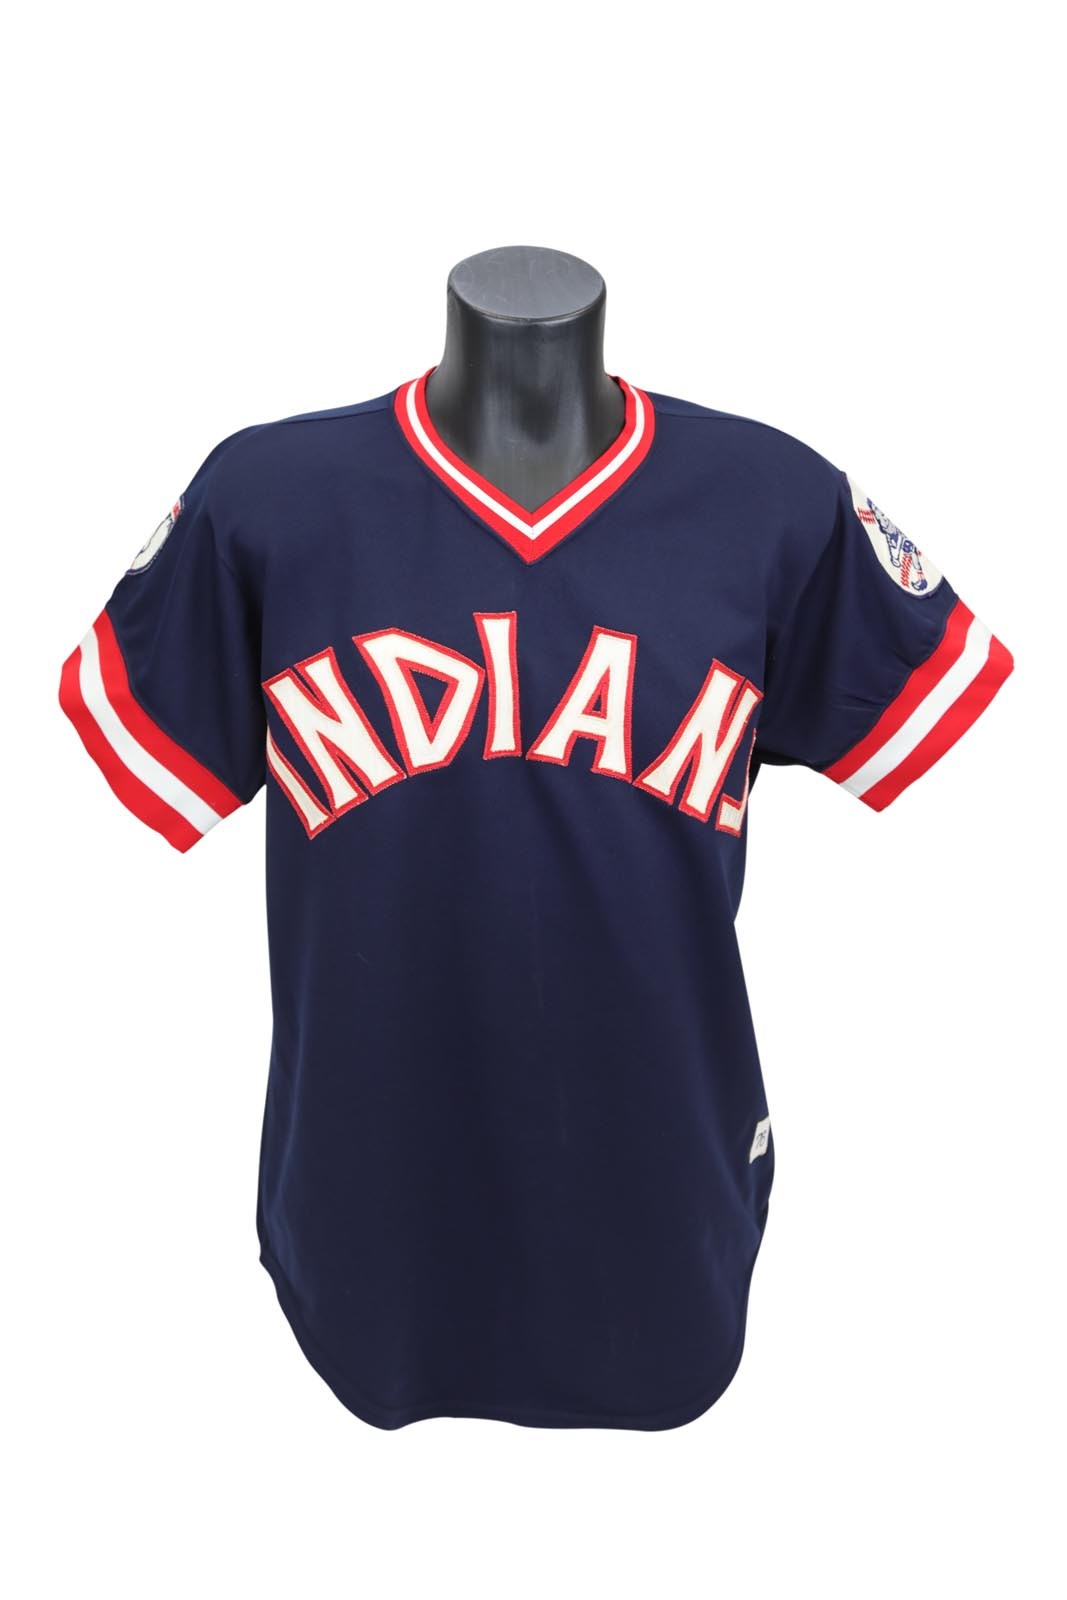 1929 Boston Braves Game Worn Jersey with Rare Indian Head Patch., Lot  #80112